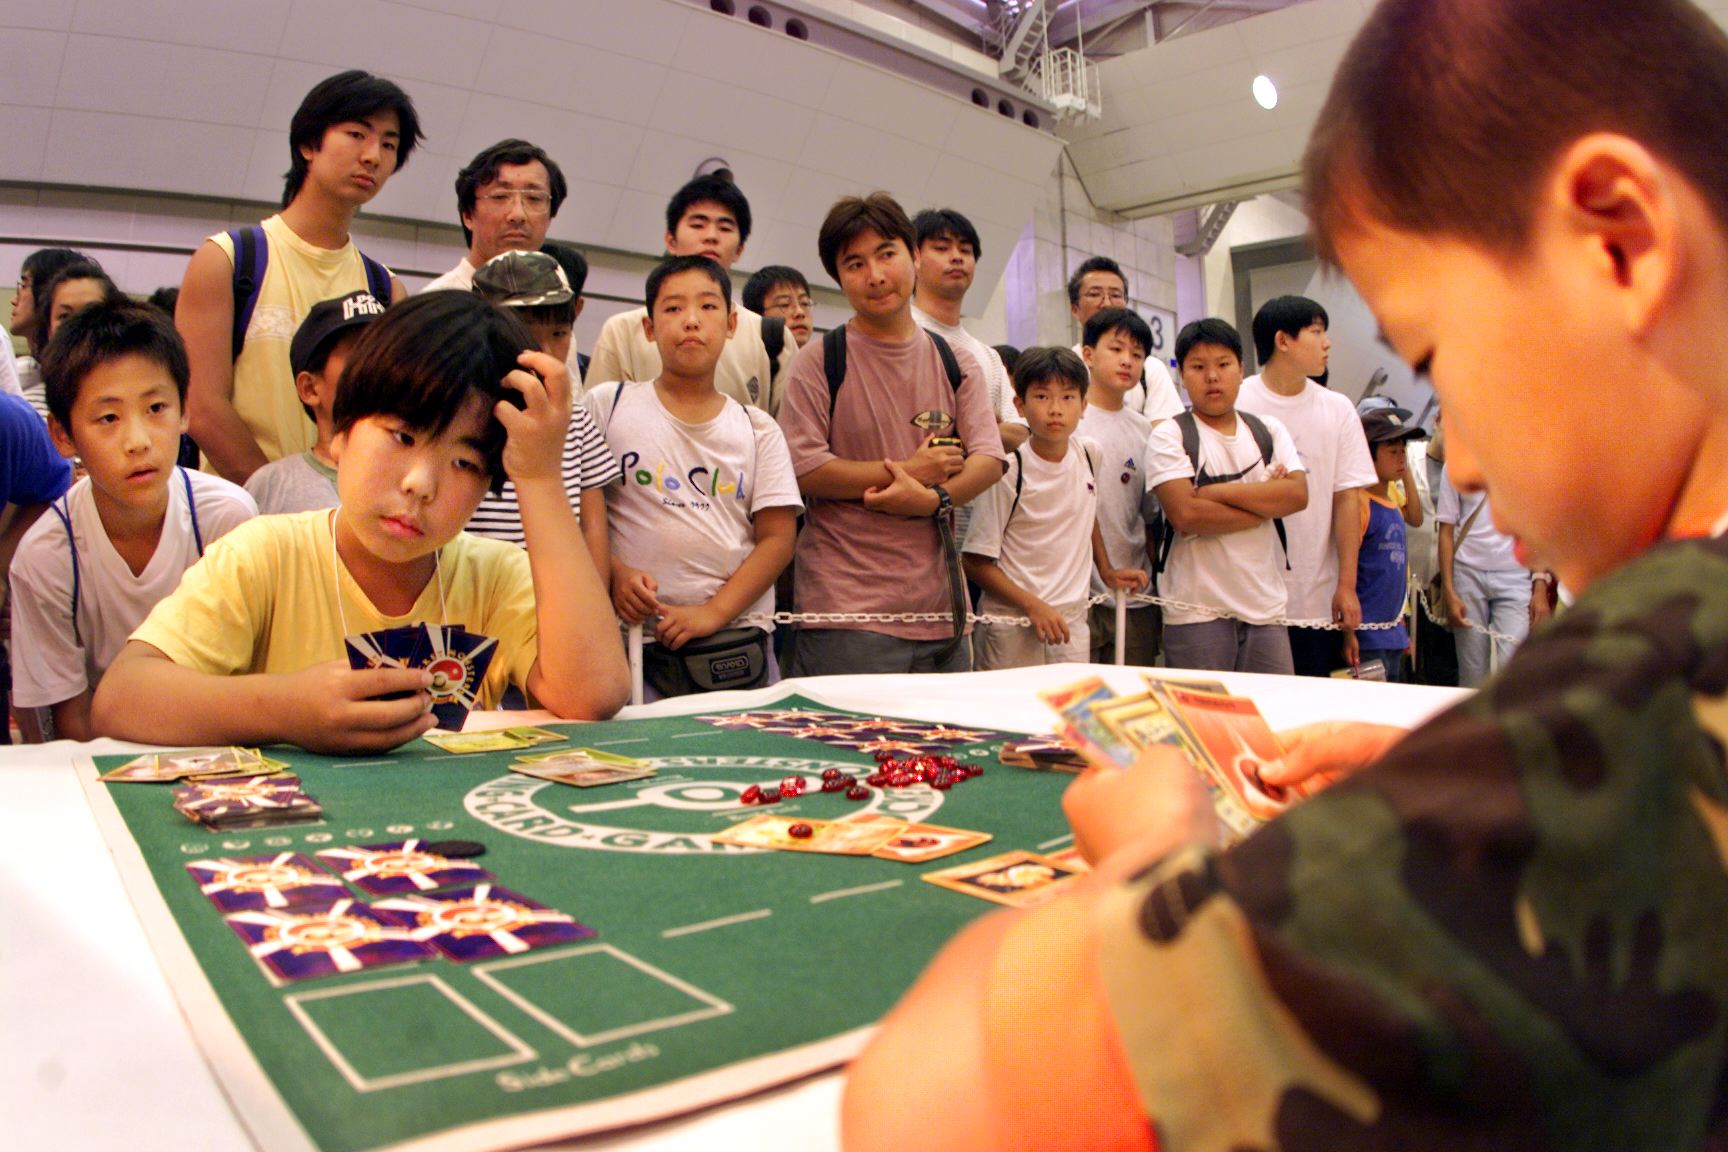 A crowd watches as Japanese boys play a close game